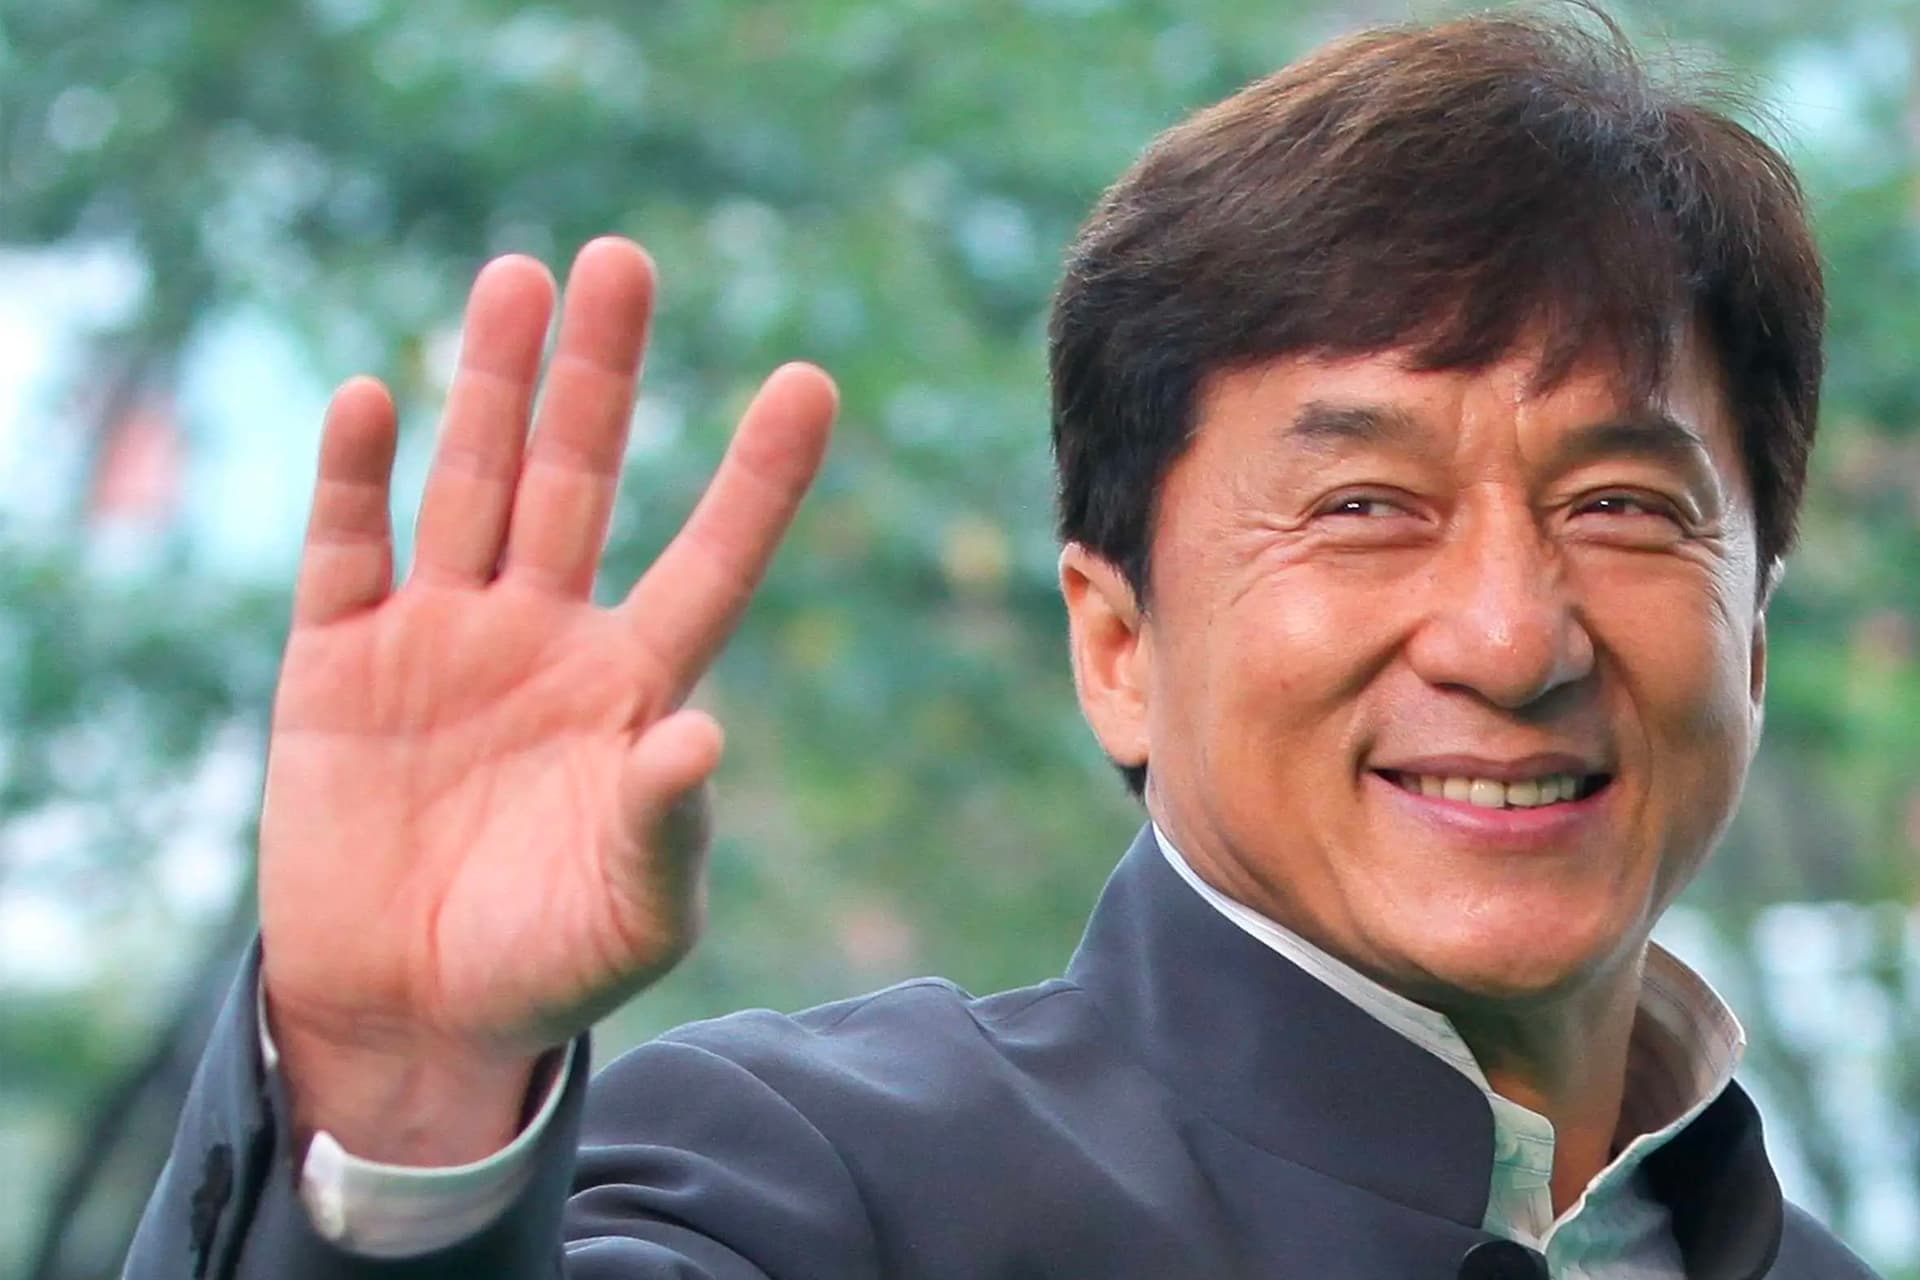 jackie chan waving hand smile 65492a937c0c309f94431345